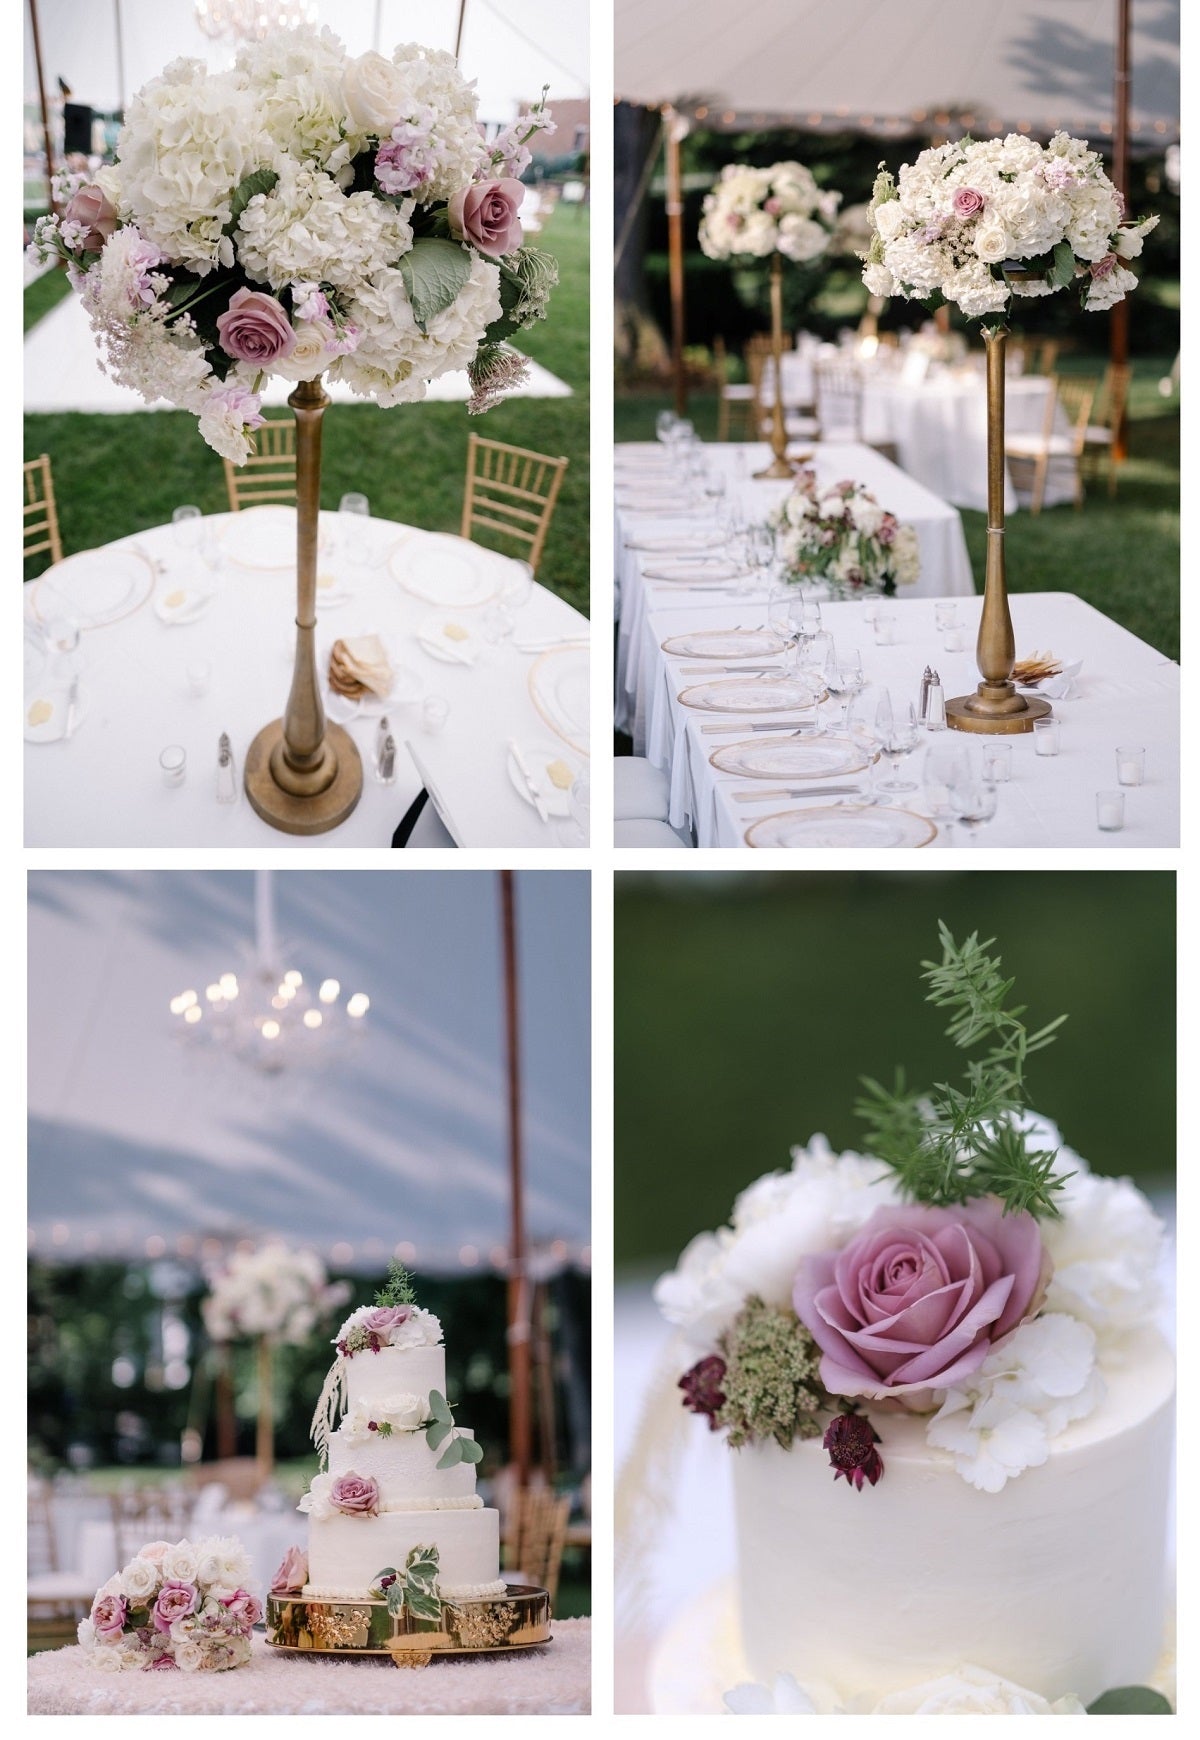 A collage of lavender/white elevated centerpieces, and a close up on the wedding cake with florals.